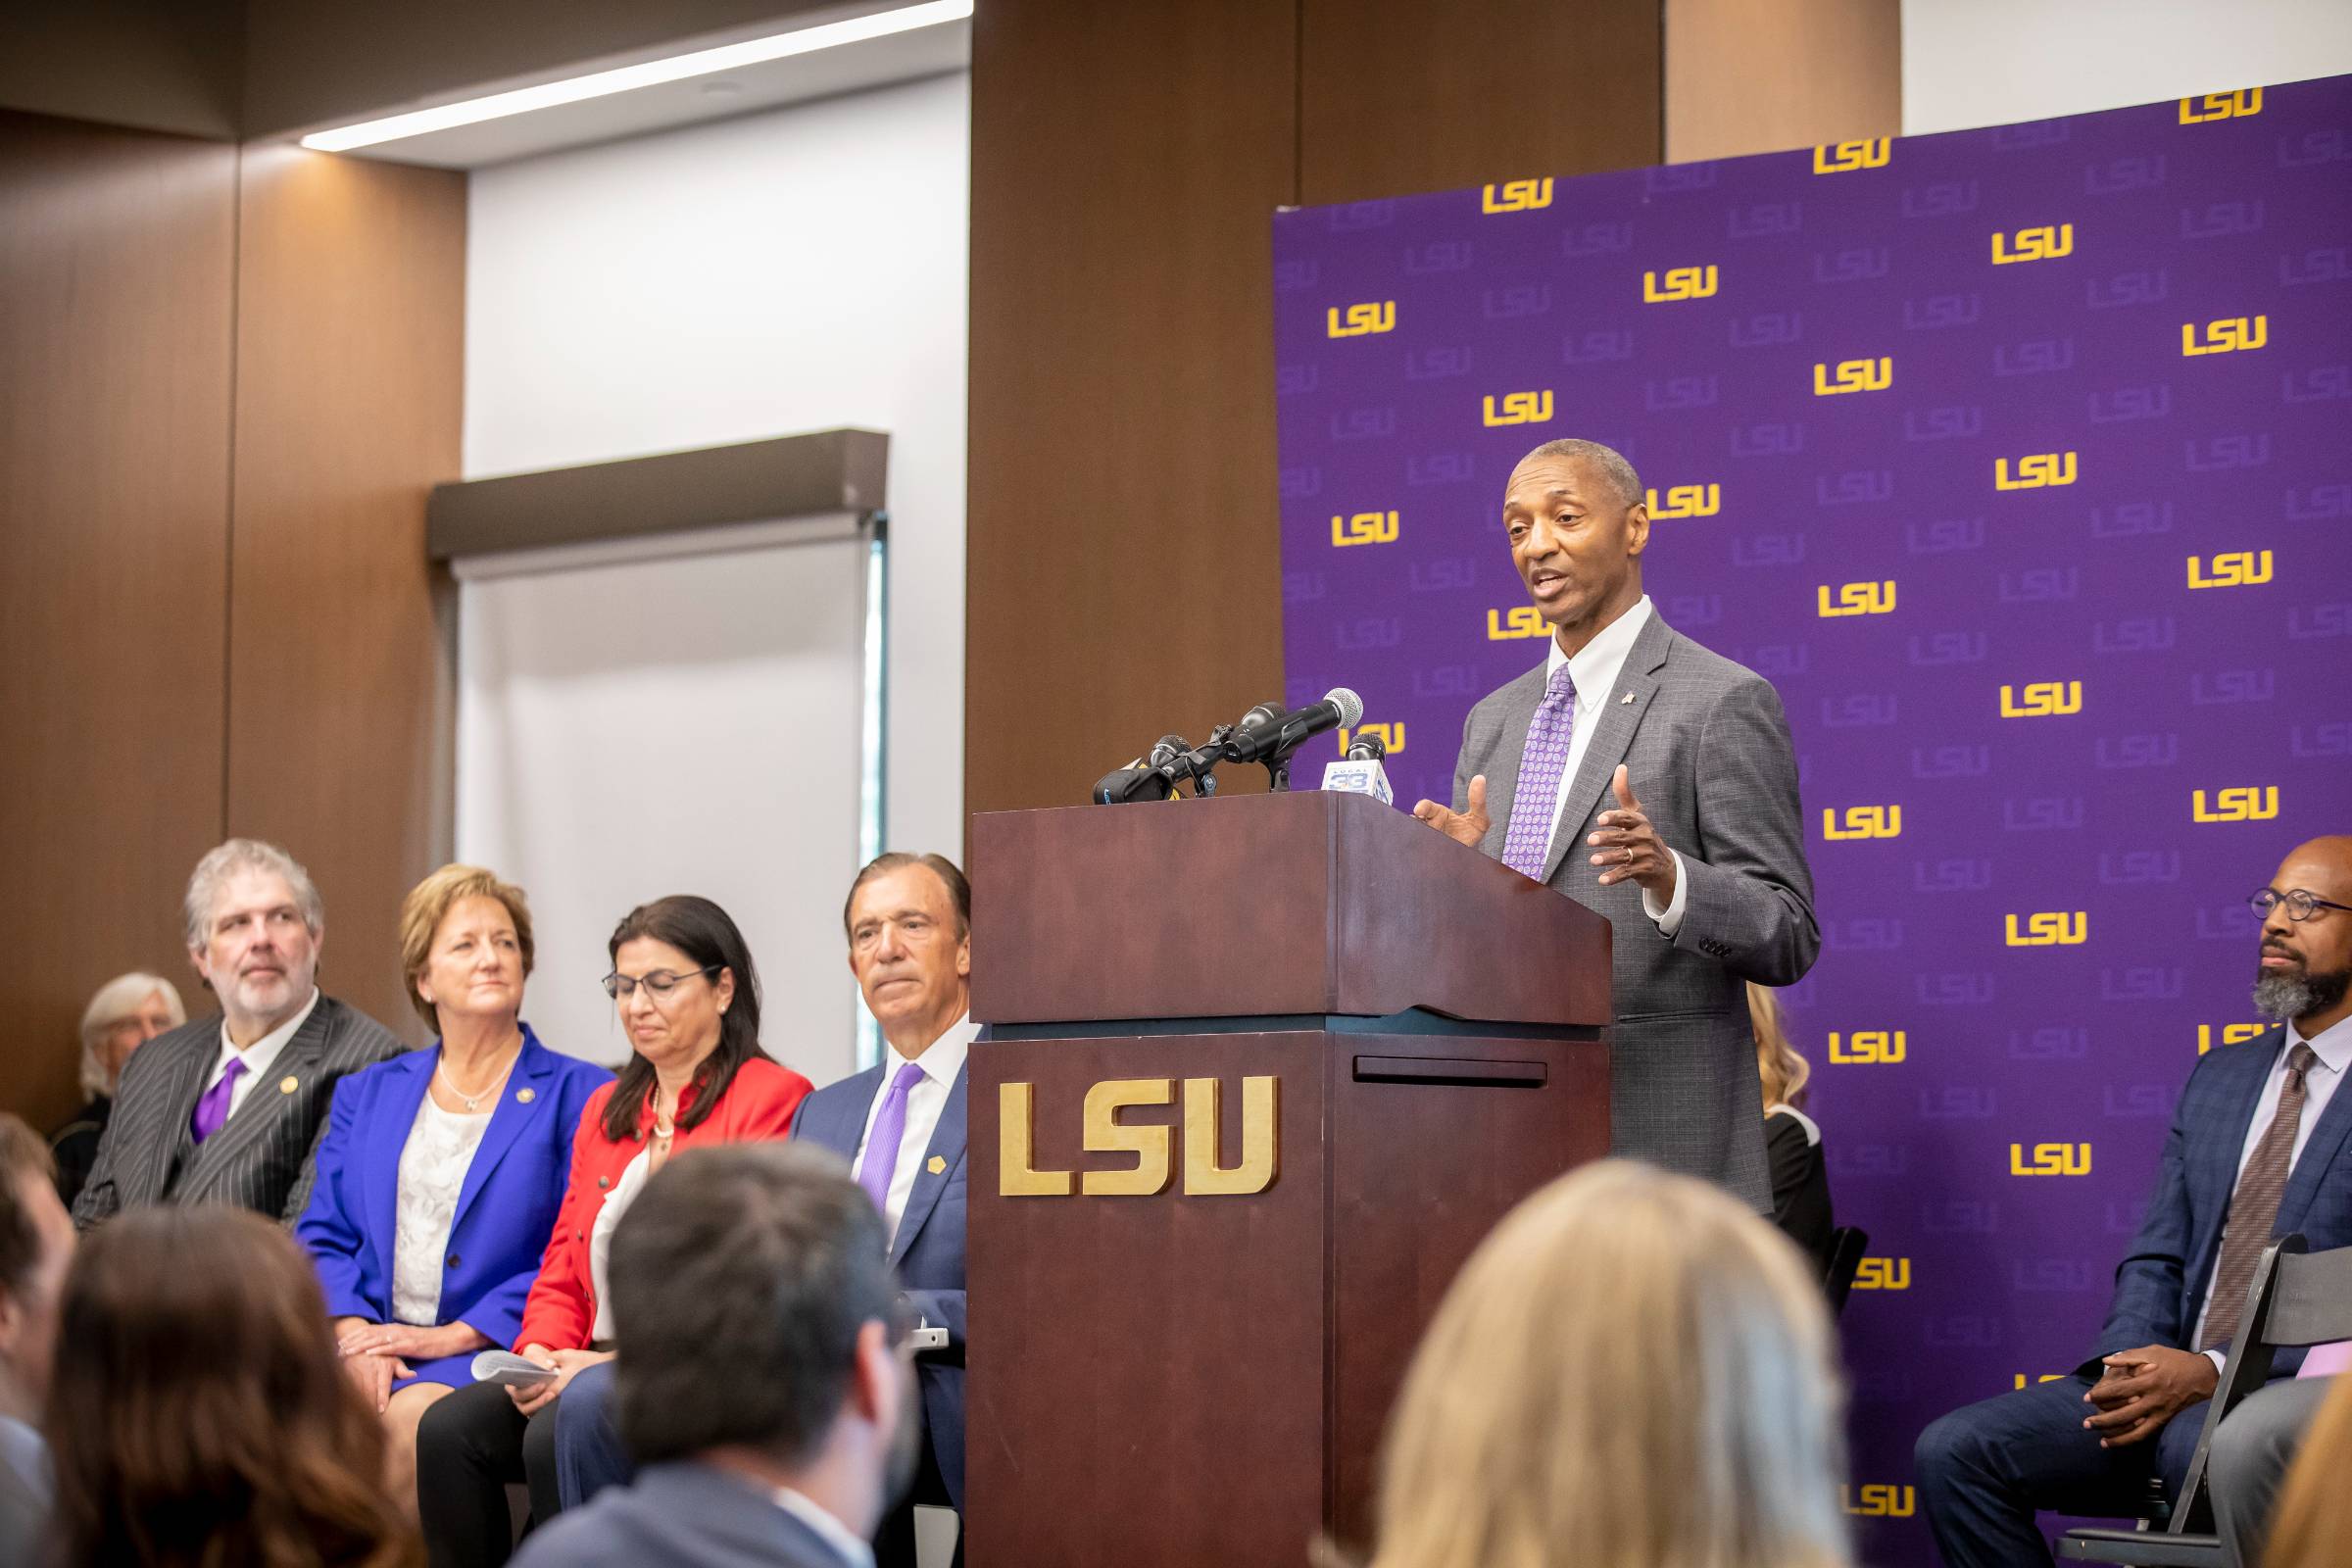 President Tate speaks at press conference